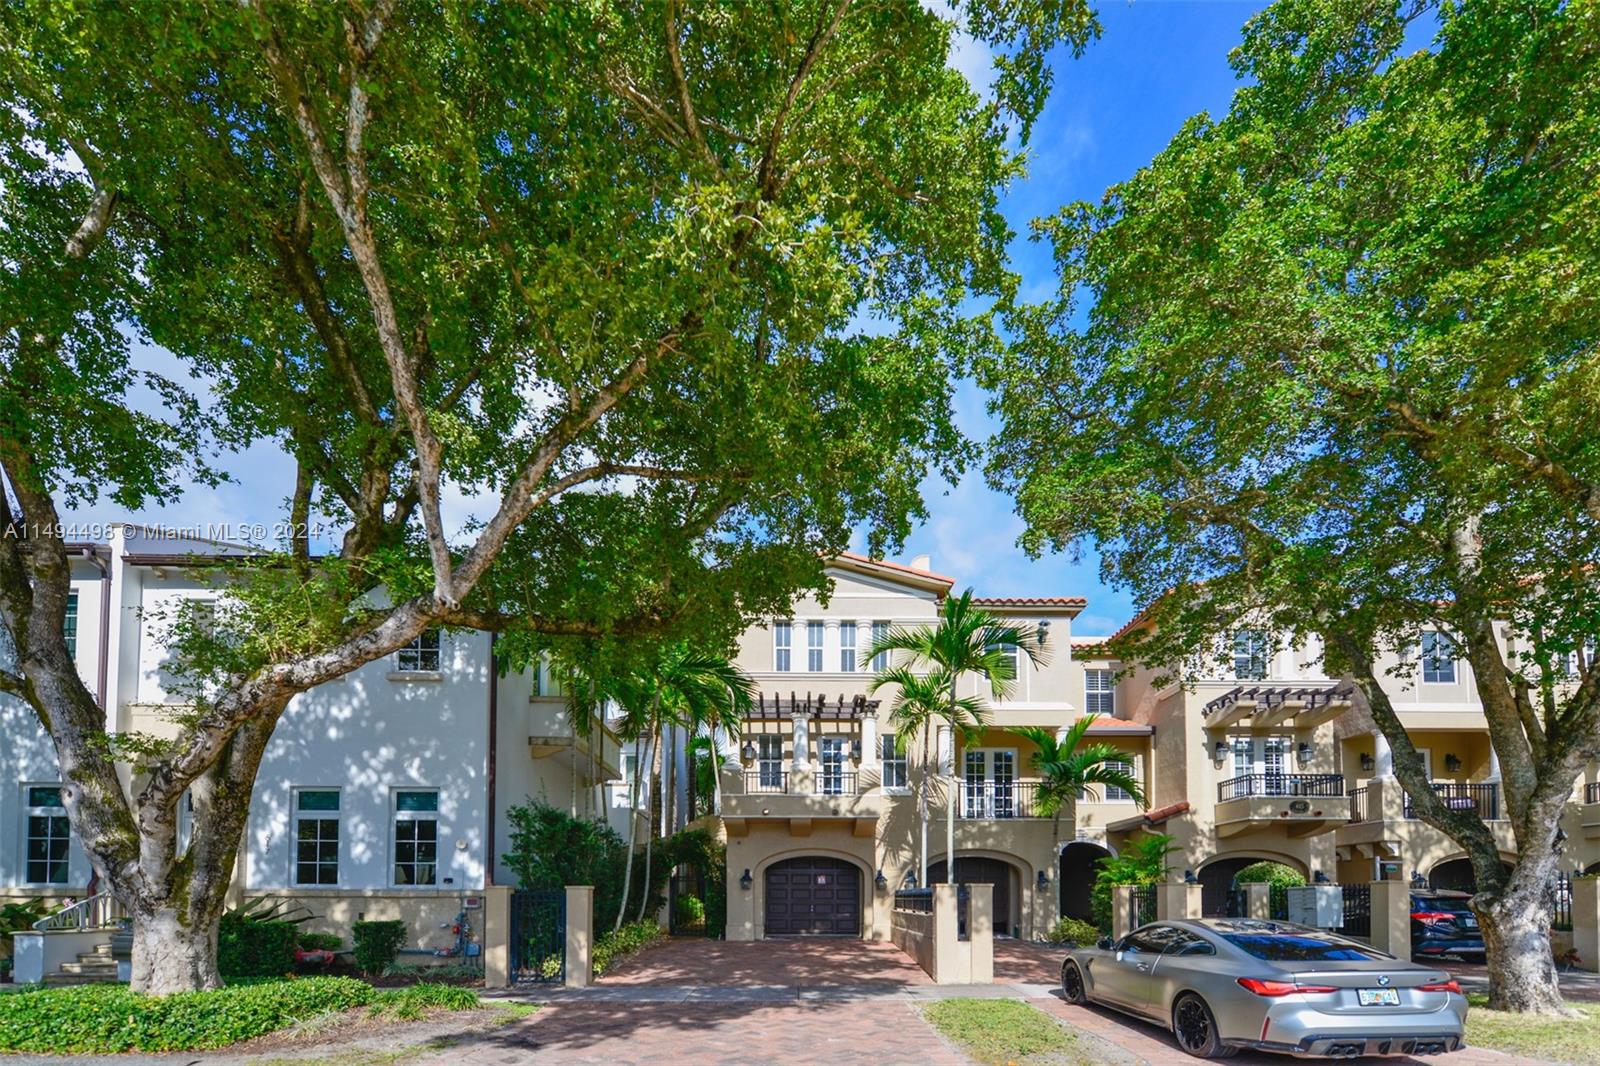 Beautiful & rarely available corner townhouse in the heart of Coral Gables. Bright & spacious 4 bedroom townhome filled with charm & character. Features a private elevator, 1 bedroom located in the 1st floor, 3 bedrooms upstairs, & 3.5 bathrooms, open living spaces with high ceilings, a fully equipped kitchen, 1 car garage, & private patio/yard. Amazing location! Just a few blocks from Miracle Mile (shops, restaurants), and 1 block from The Coral Gables Youth Center. A 5 minute drive from the University of Miami & shops at Merrick Park.